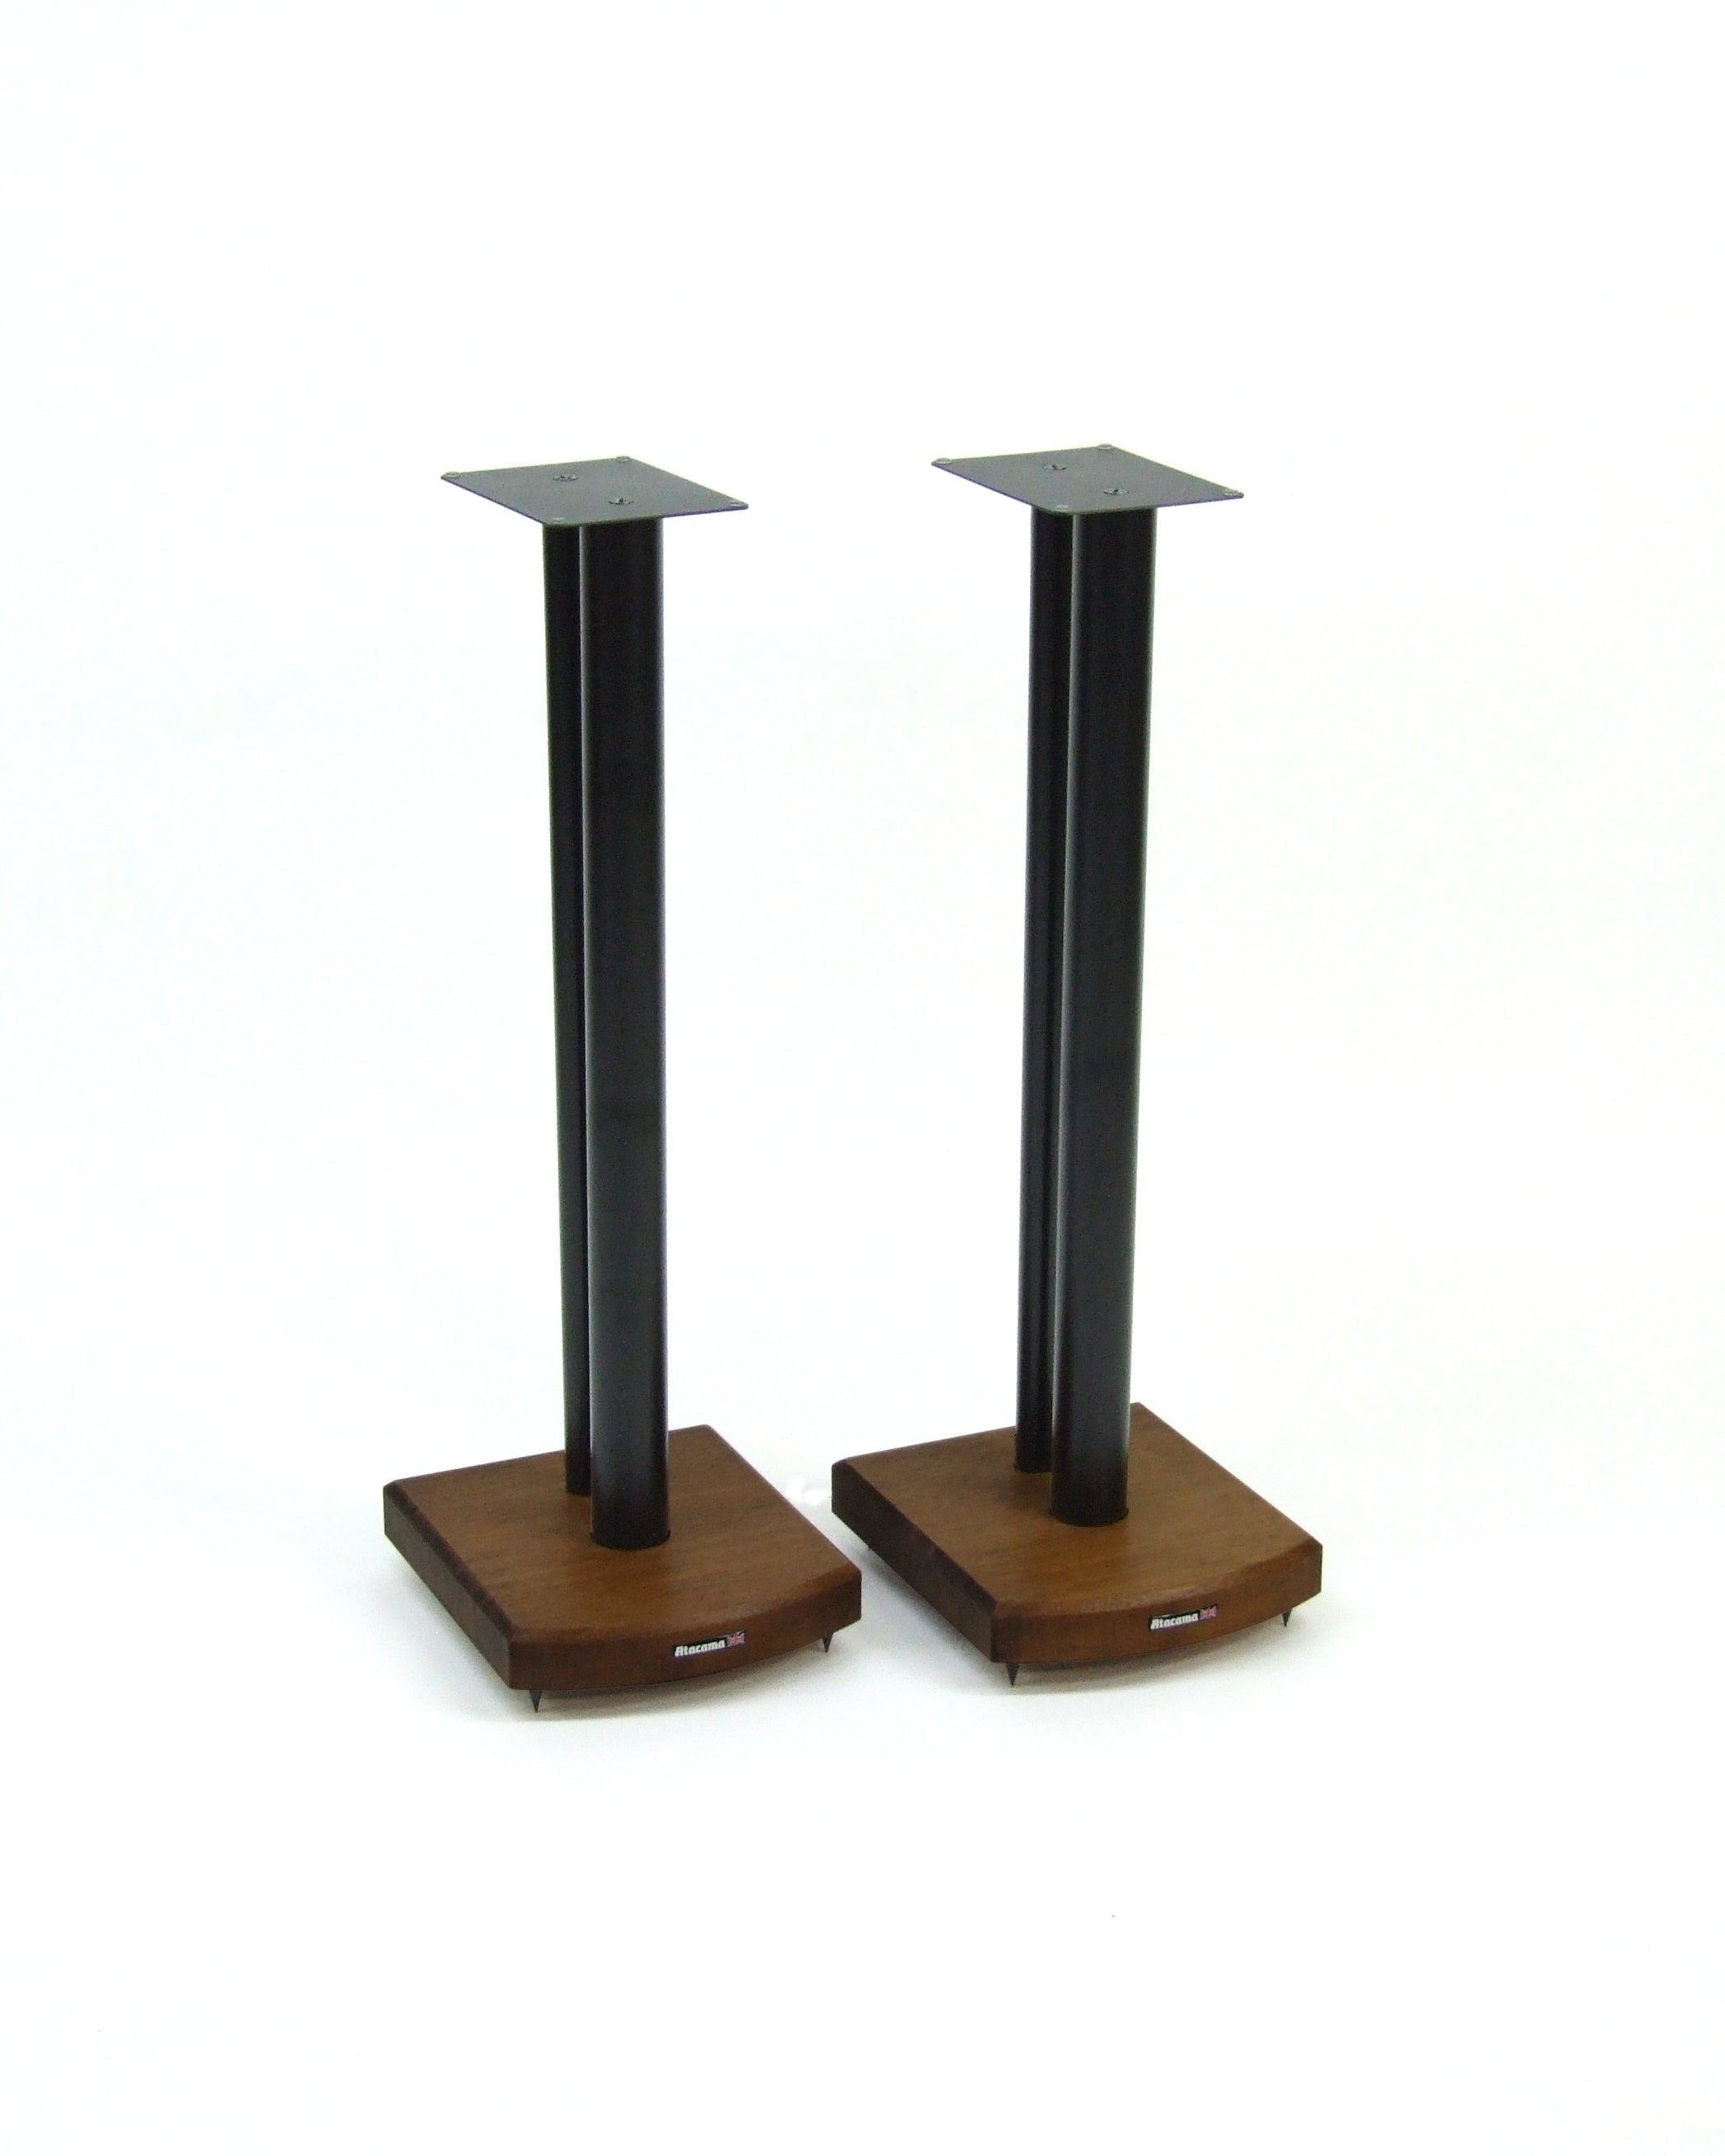 MOSECO 7 speaker stands (Pair)